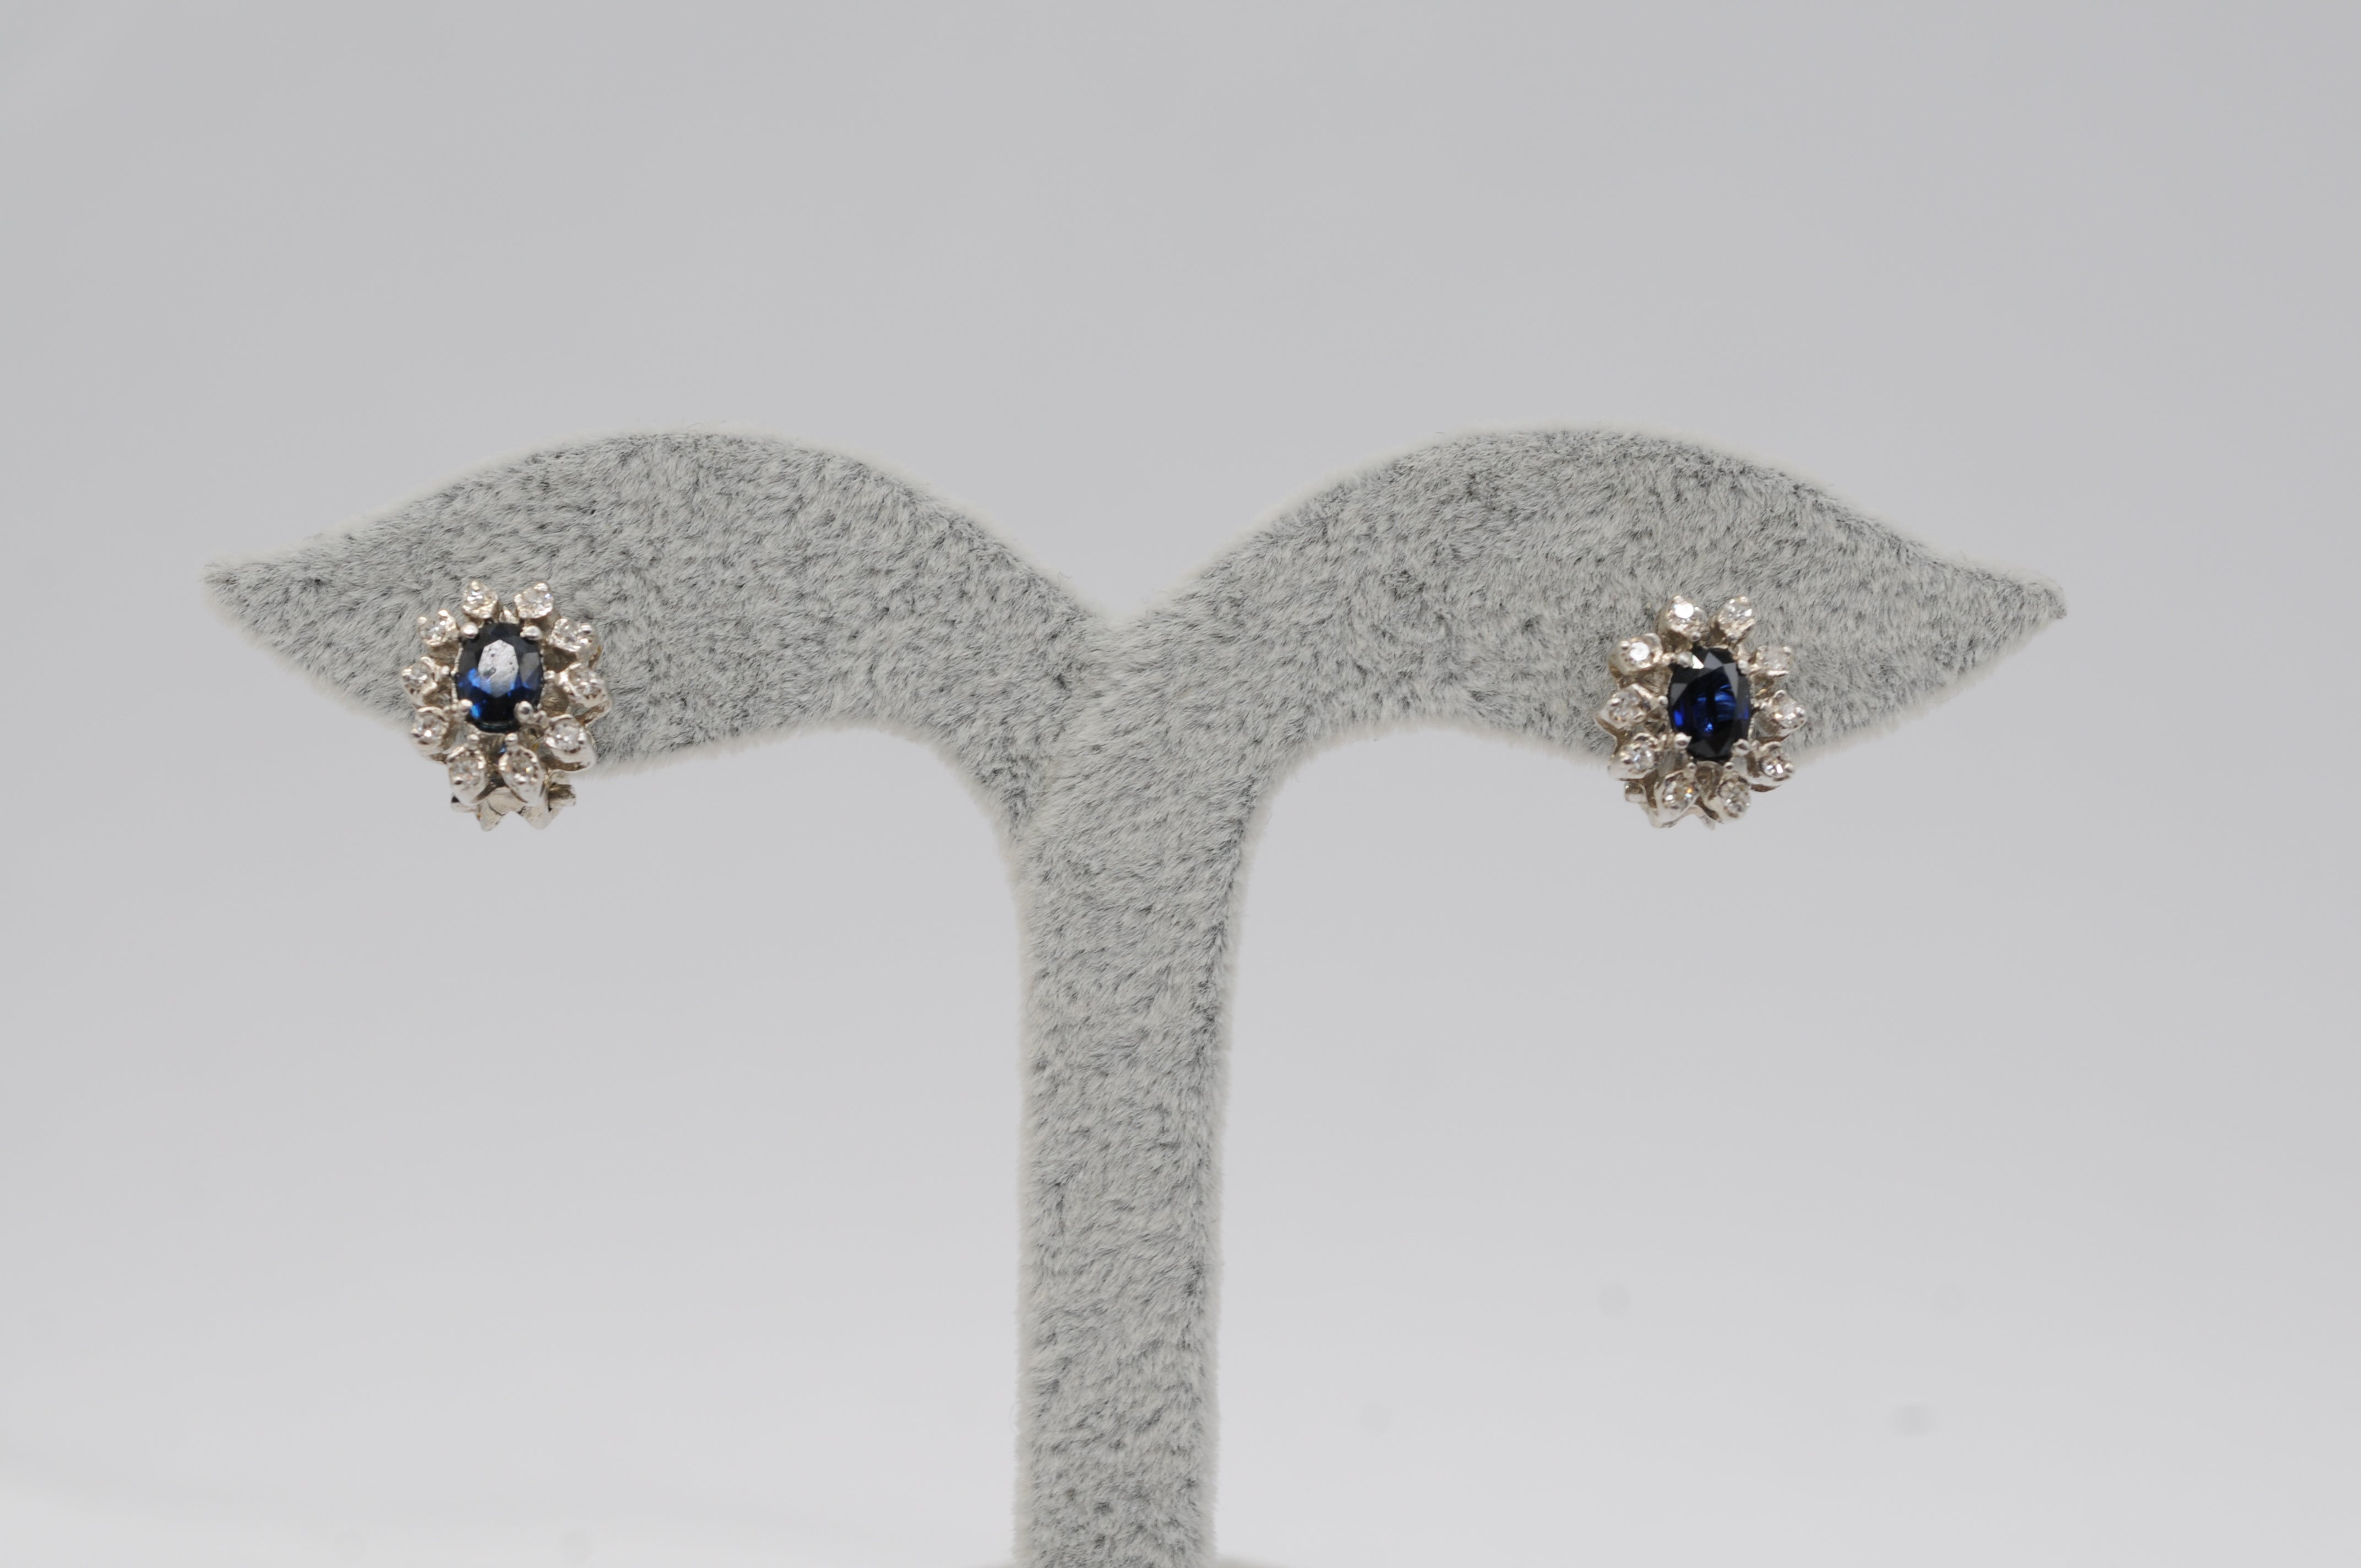 Indulge in the sheer beauty of this stunning pair of earrings. Crafted from exquisite 14k white gold, each earring features a mesmerizing sapphire in an oval cut, complemented by a total of 10 brilliant-cut diamonds, each weighing approximately 0.02